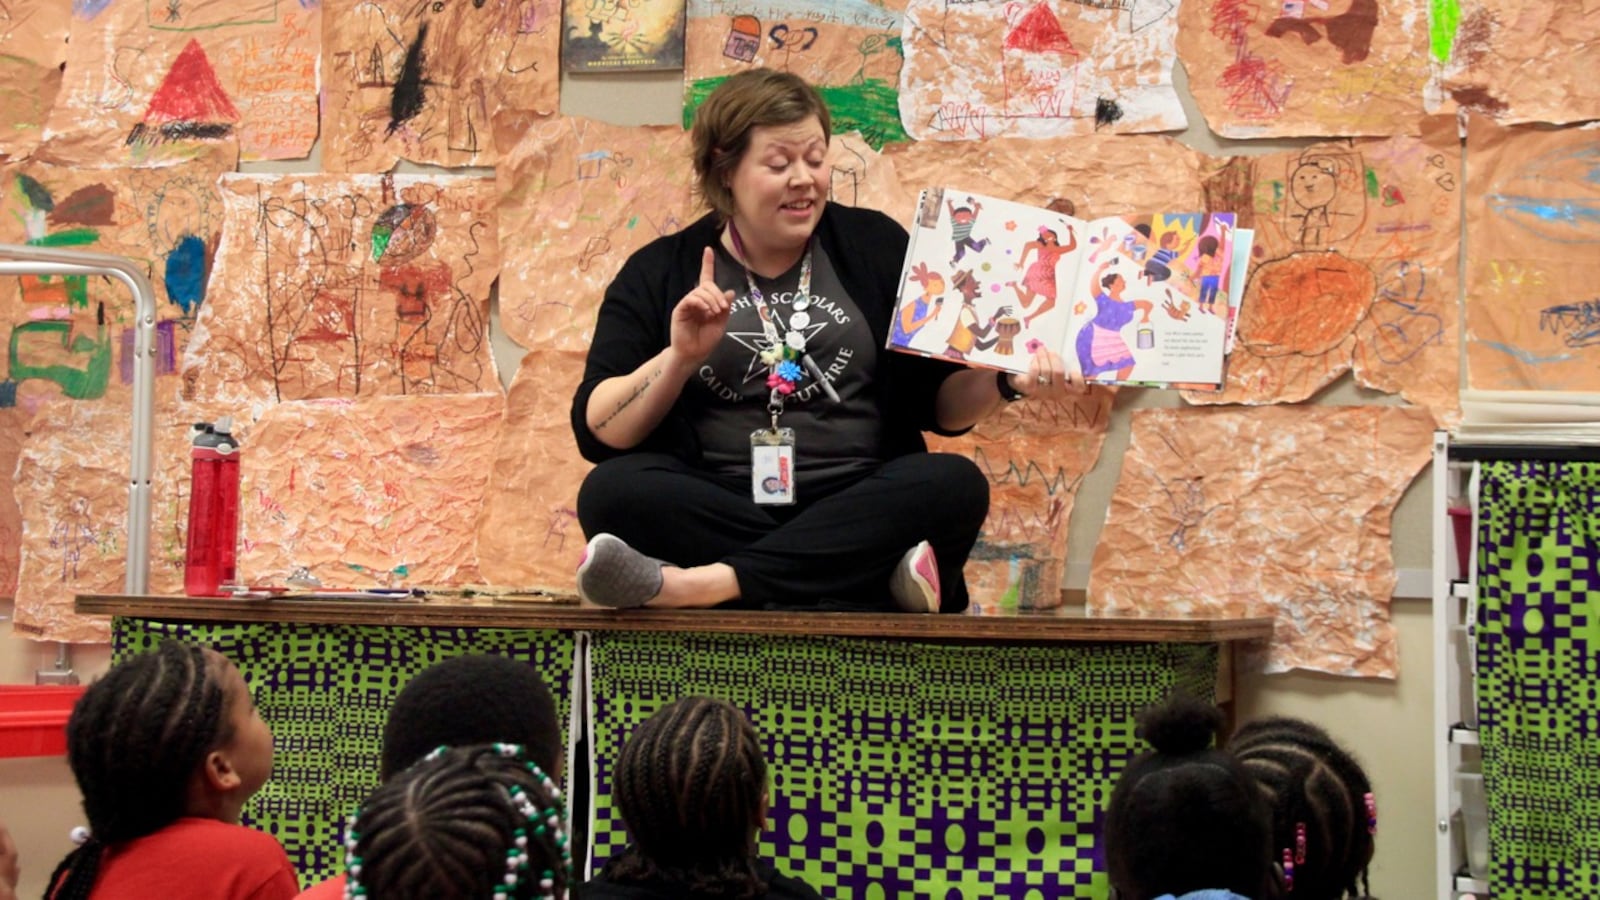 With the help of a picture book, Anna Barton Schnadelbach discusses murals with her students at Memphis Scholars Caldwell-Guthrie Elementary School.